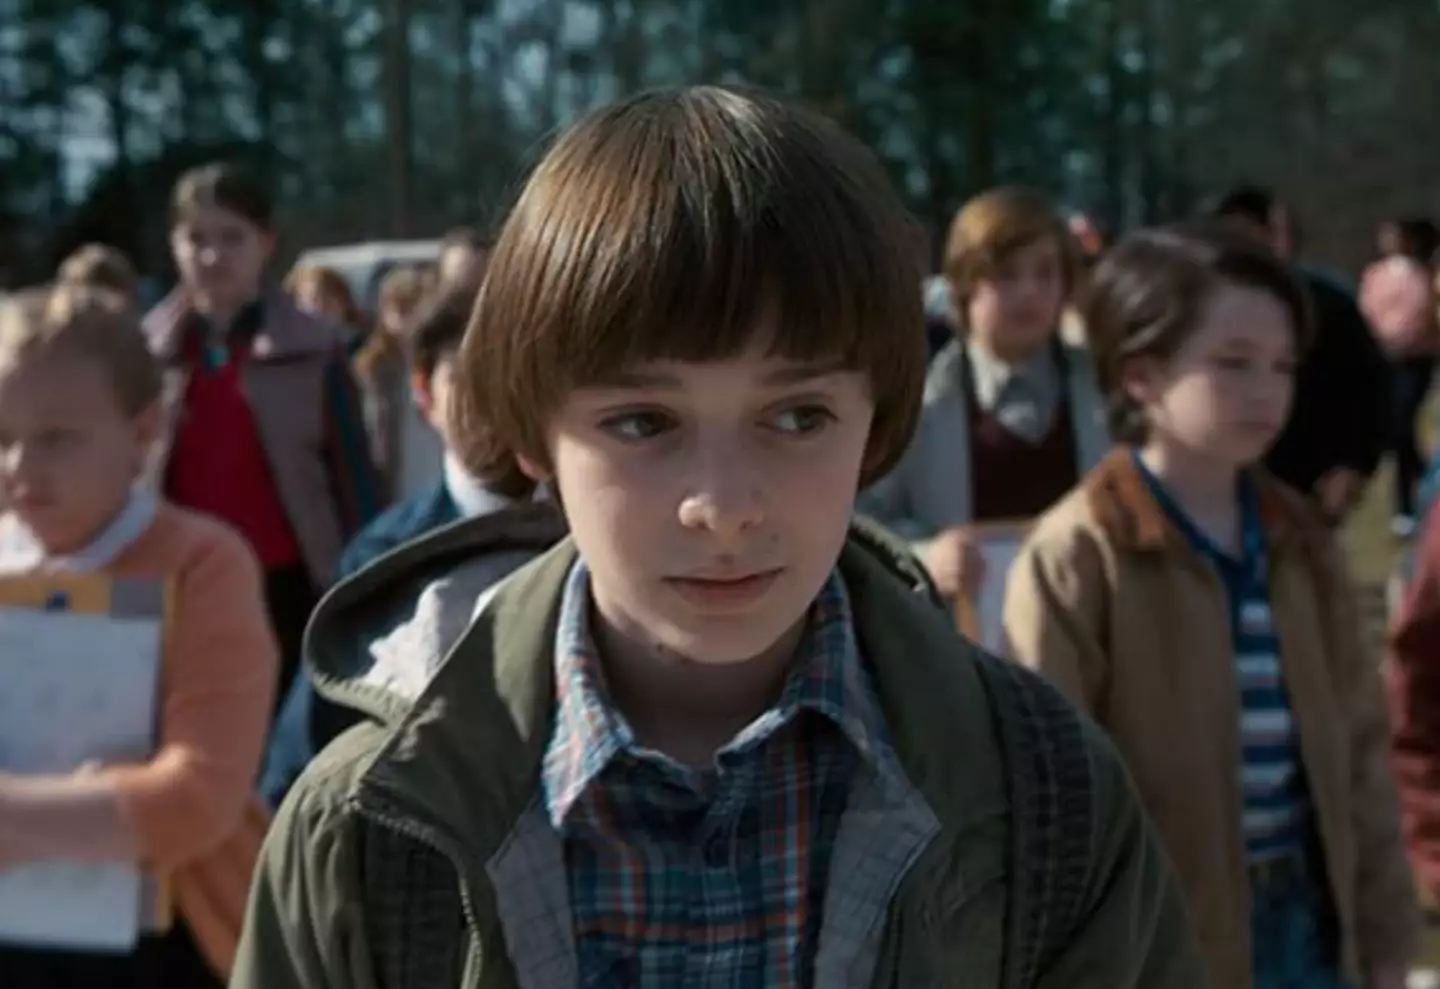 Schnapp was 12 years old when he first appeared in the role of Will Byers.